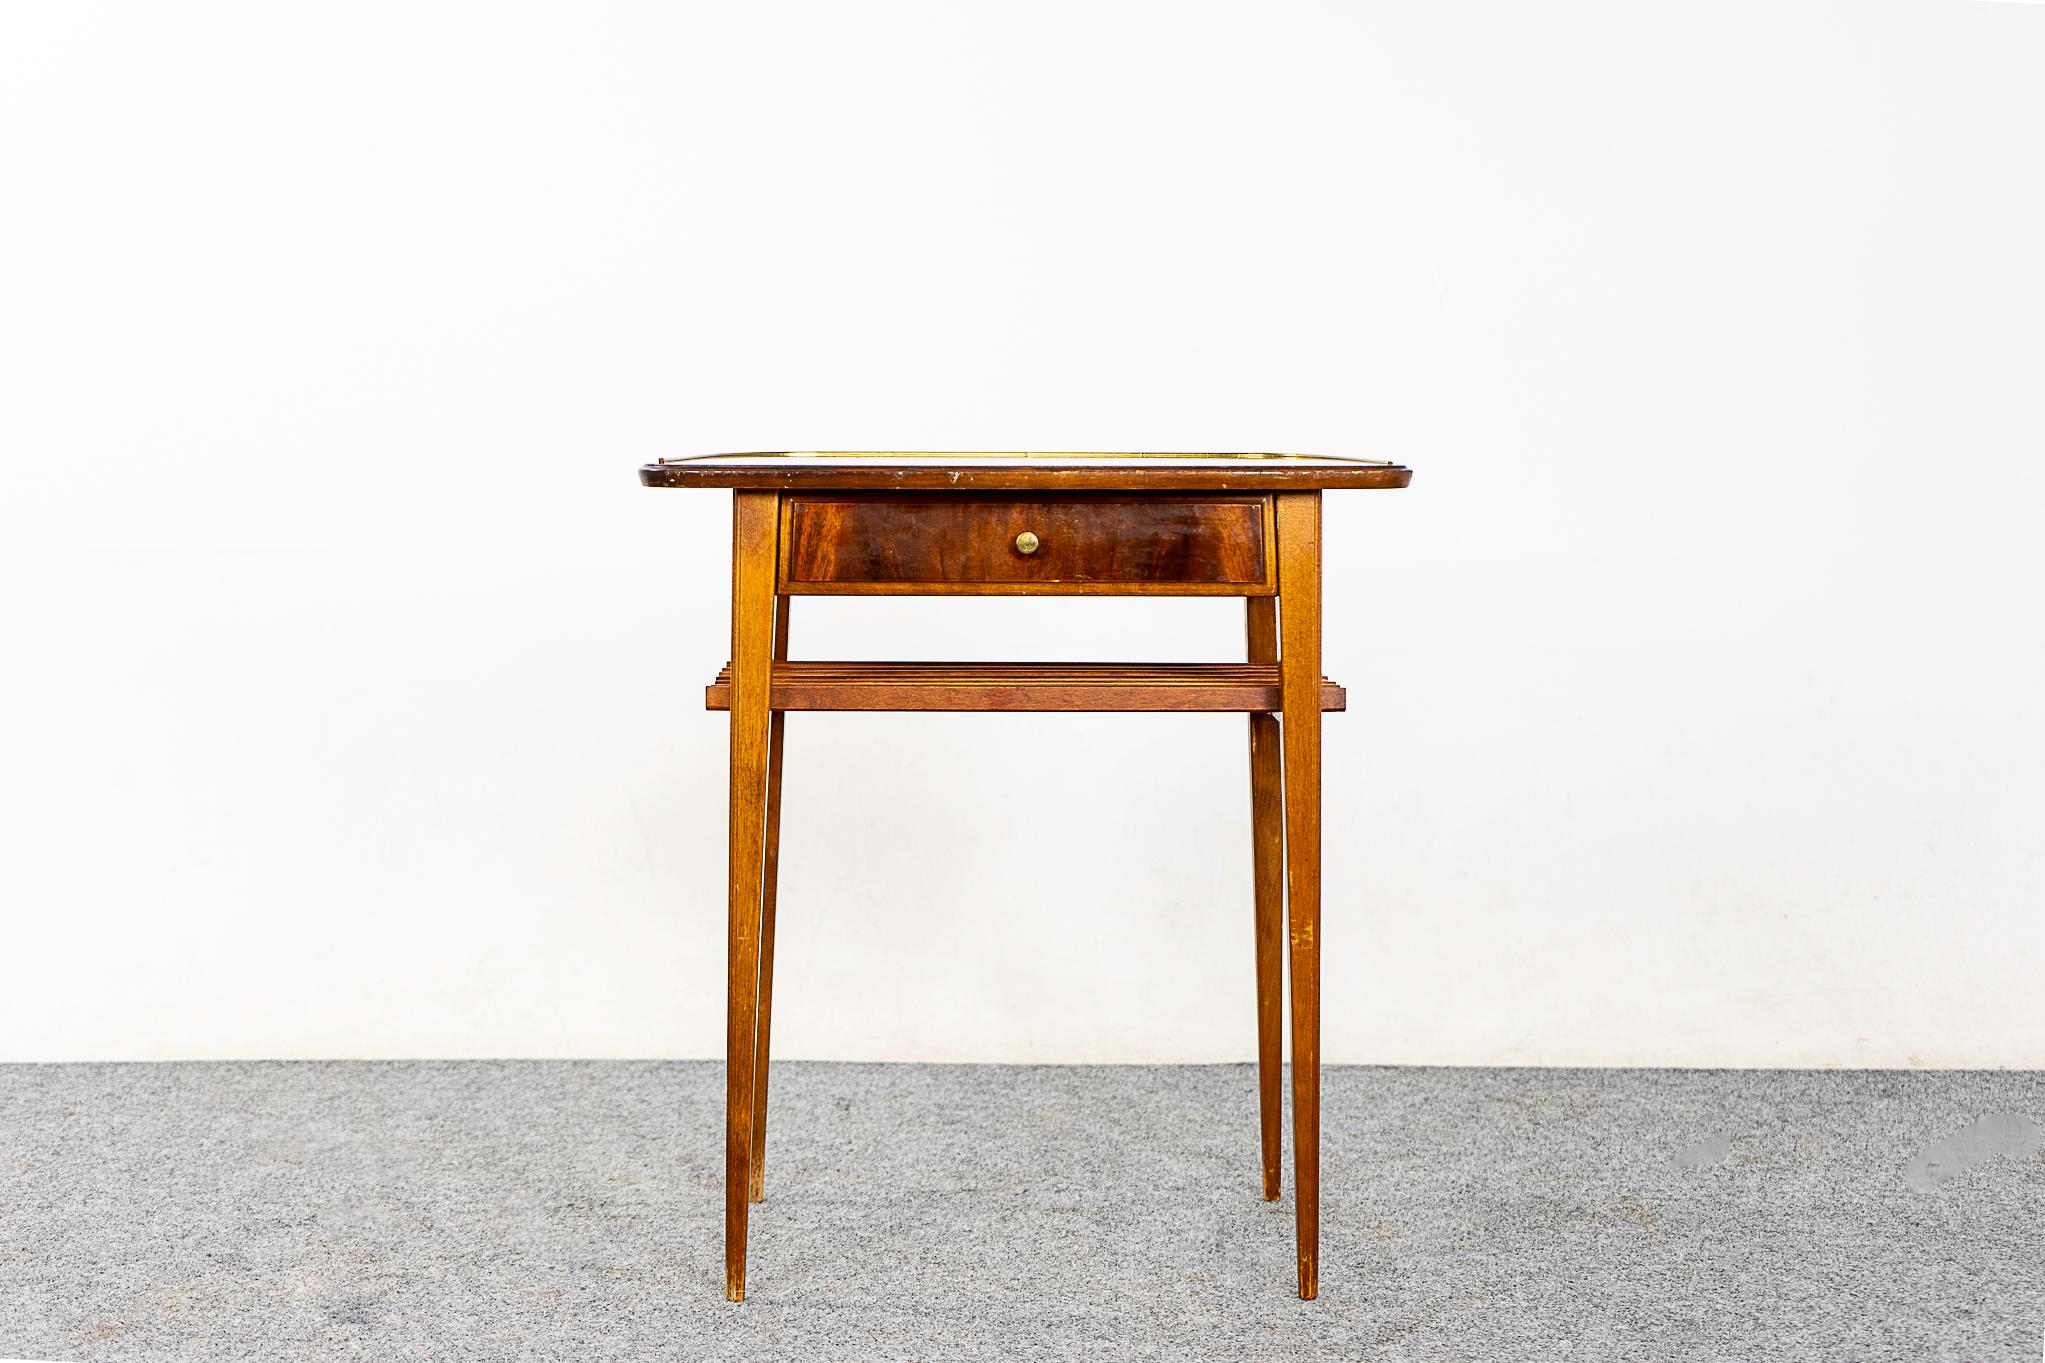 Mahogany Danish modern bedside table, circa 1960s. Beautifully veneered case rests on slender tapered legs. Drawer offer storage for small items while lower slatted shelf is perfect for your favorite book.

Unrestored item, some marks consistent